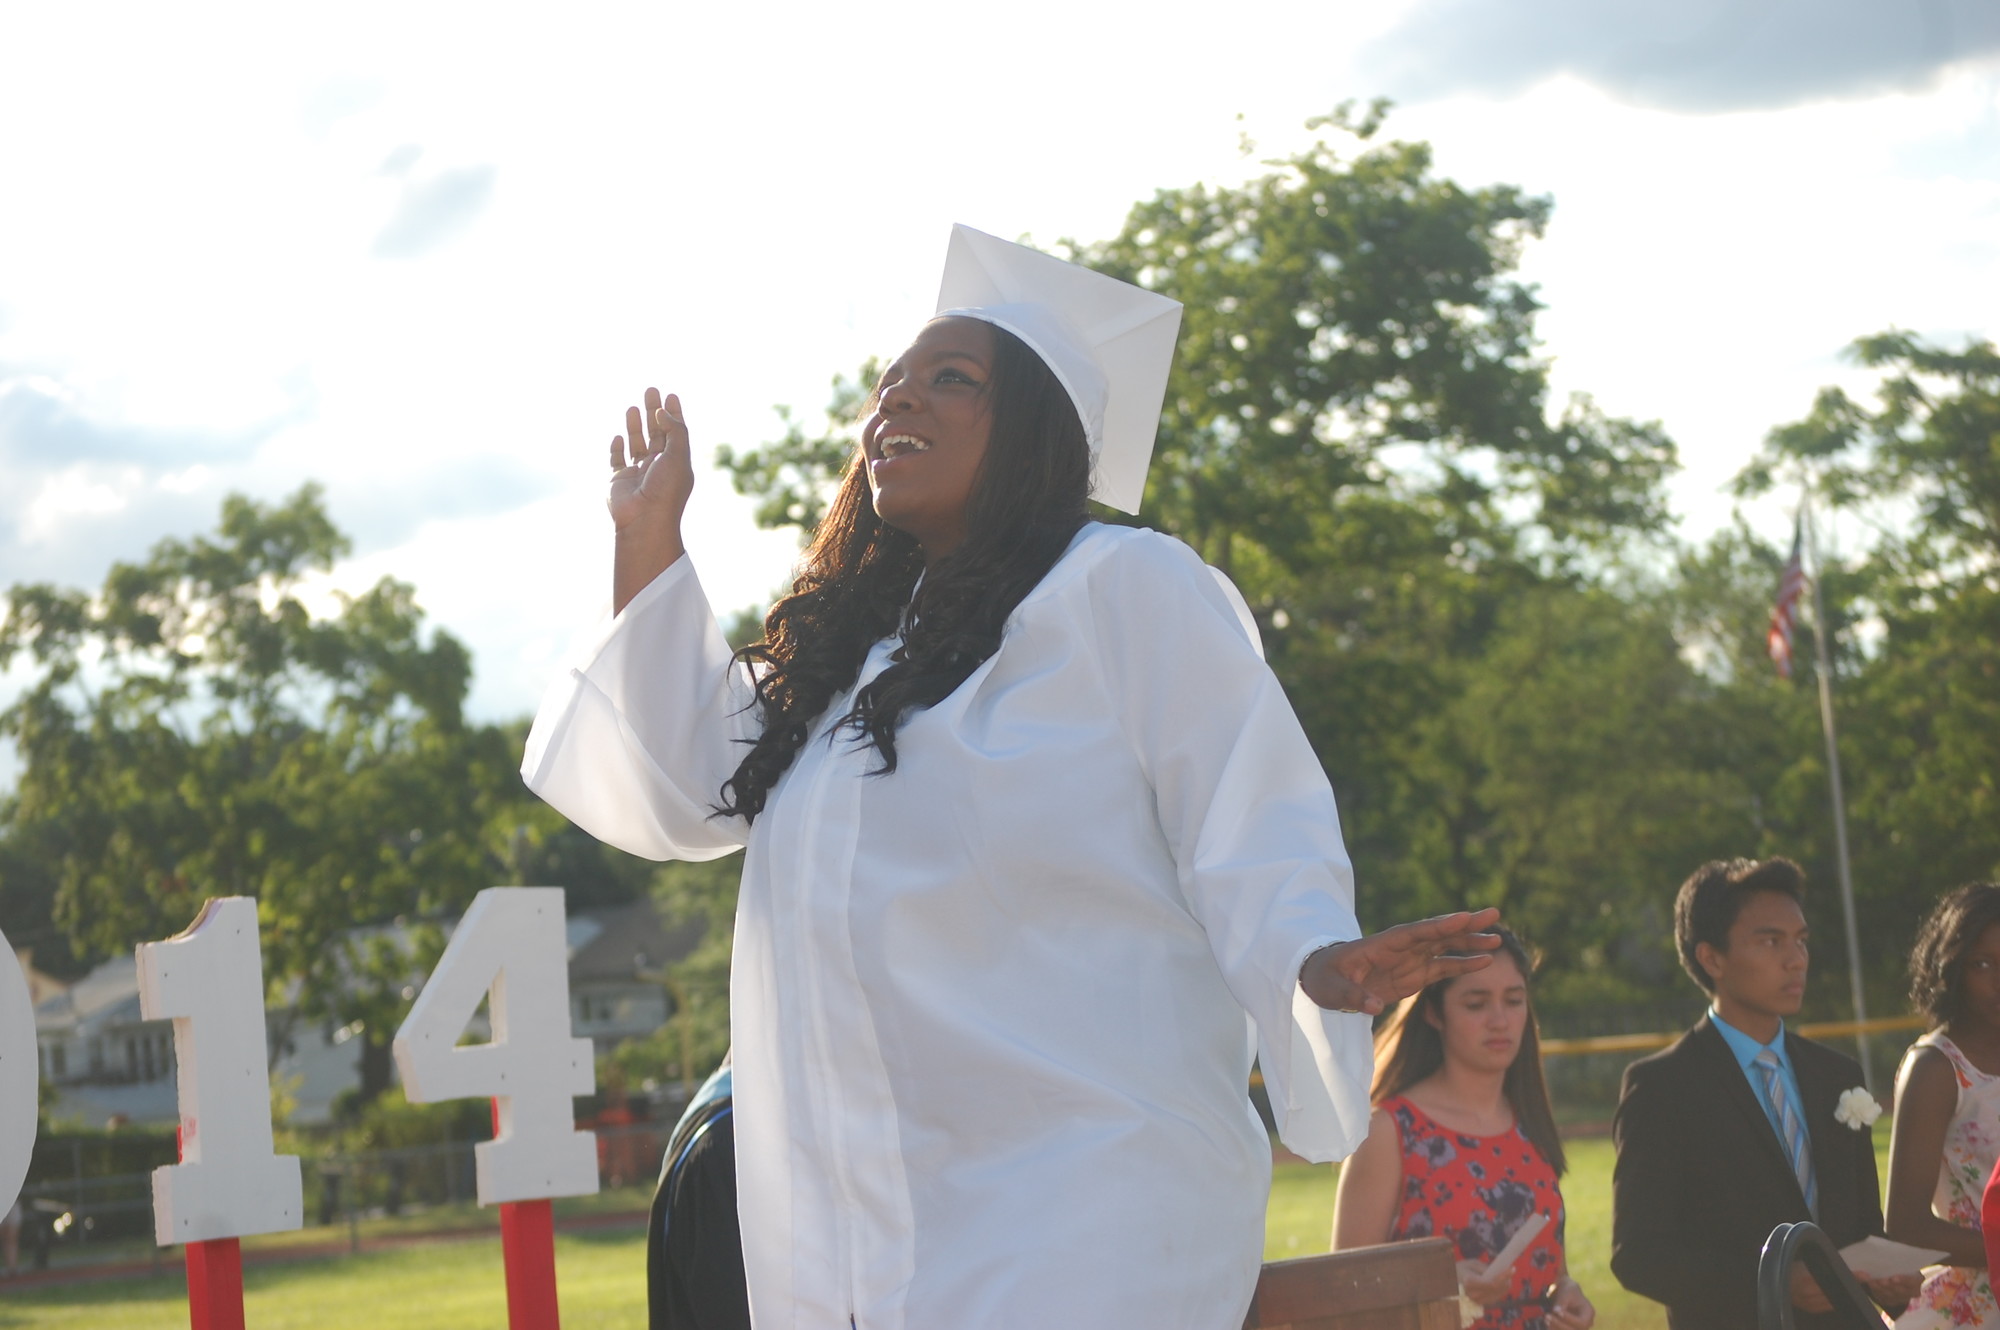 Britney Pamphile was already celebrating on her way up to receive her diploma.